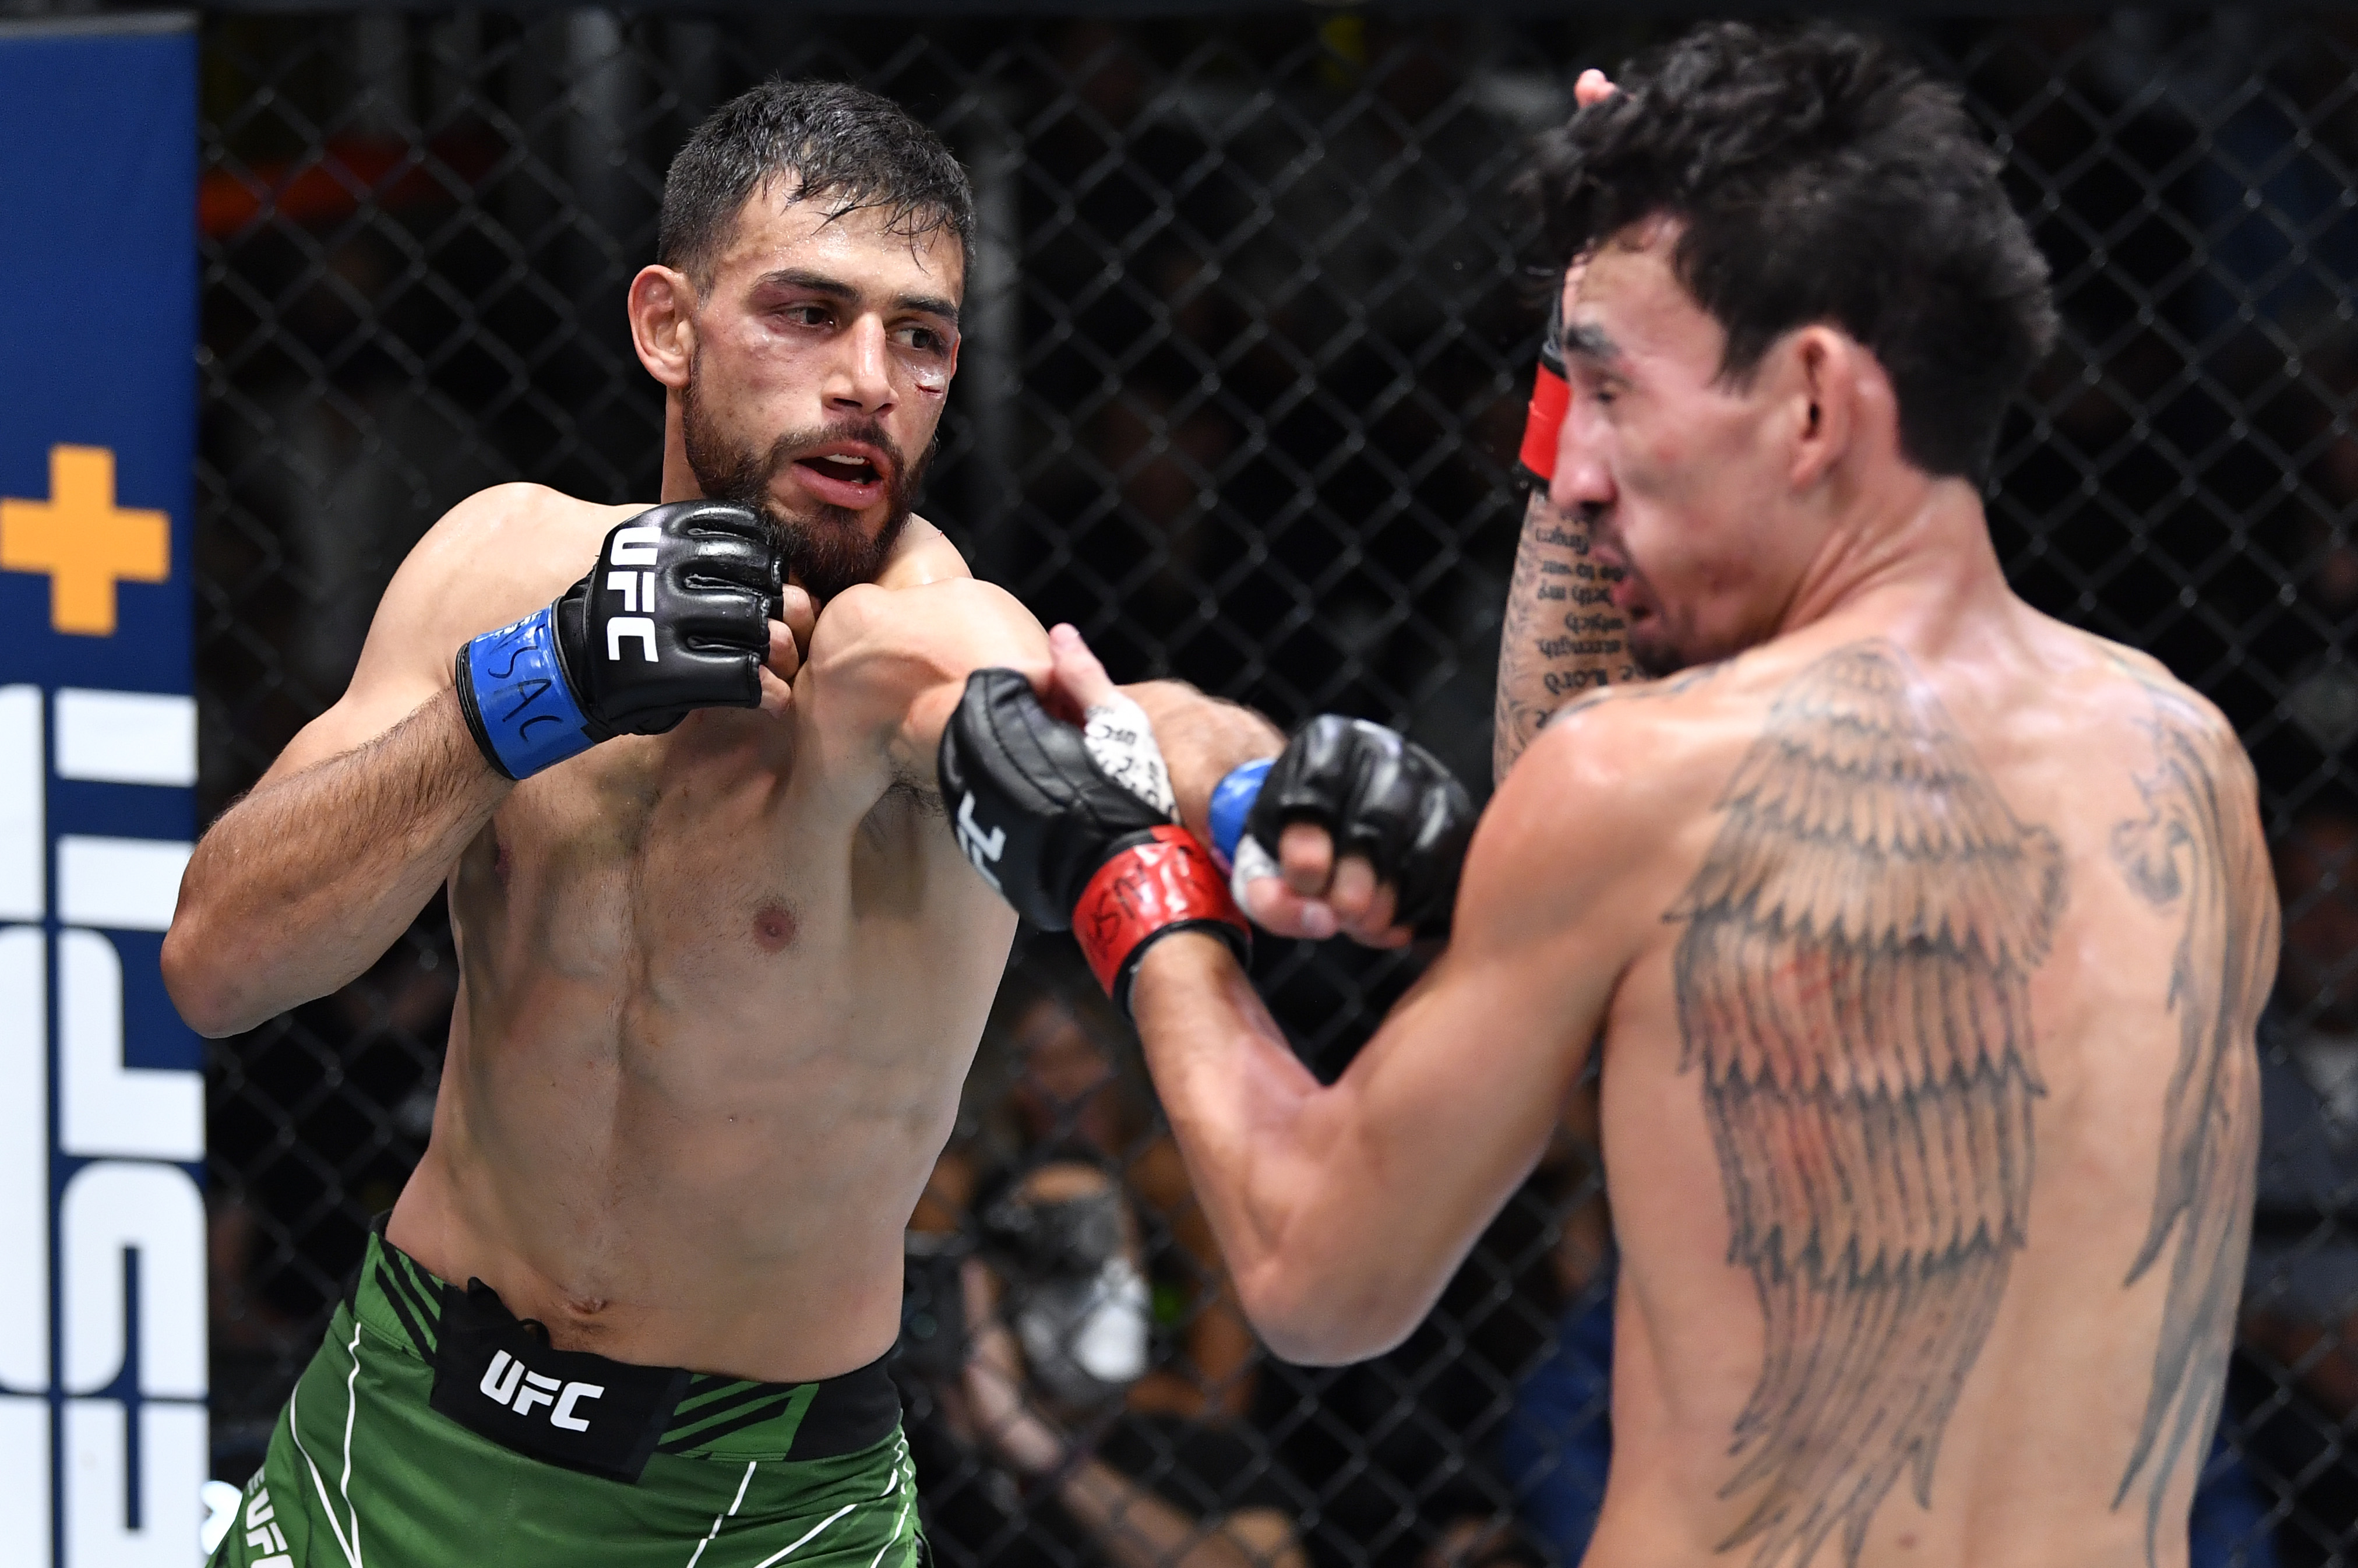 Yair Rodriguez of Mexico punches Max Holloway in a featherweight fight during the UFC Fight Night event at UFC APEX on November 13, 2021 in Las Vegas, Nevada.